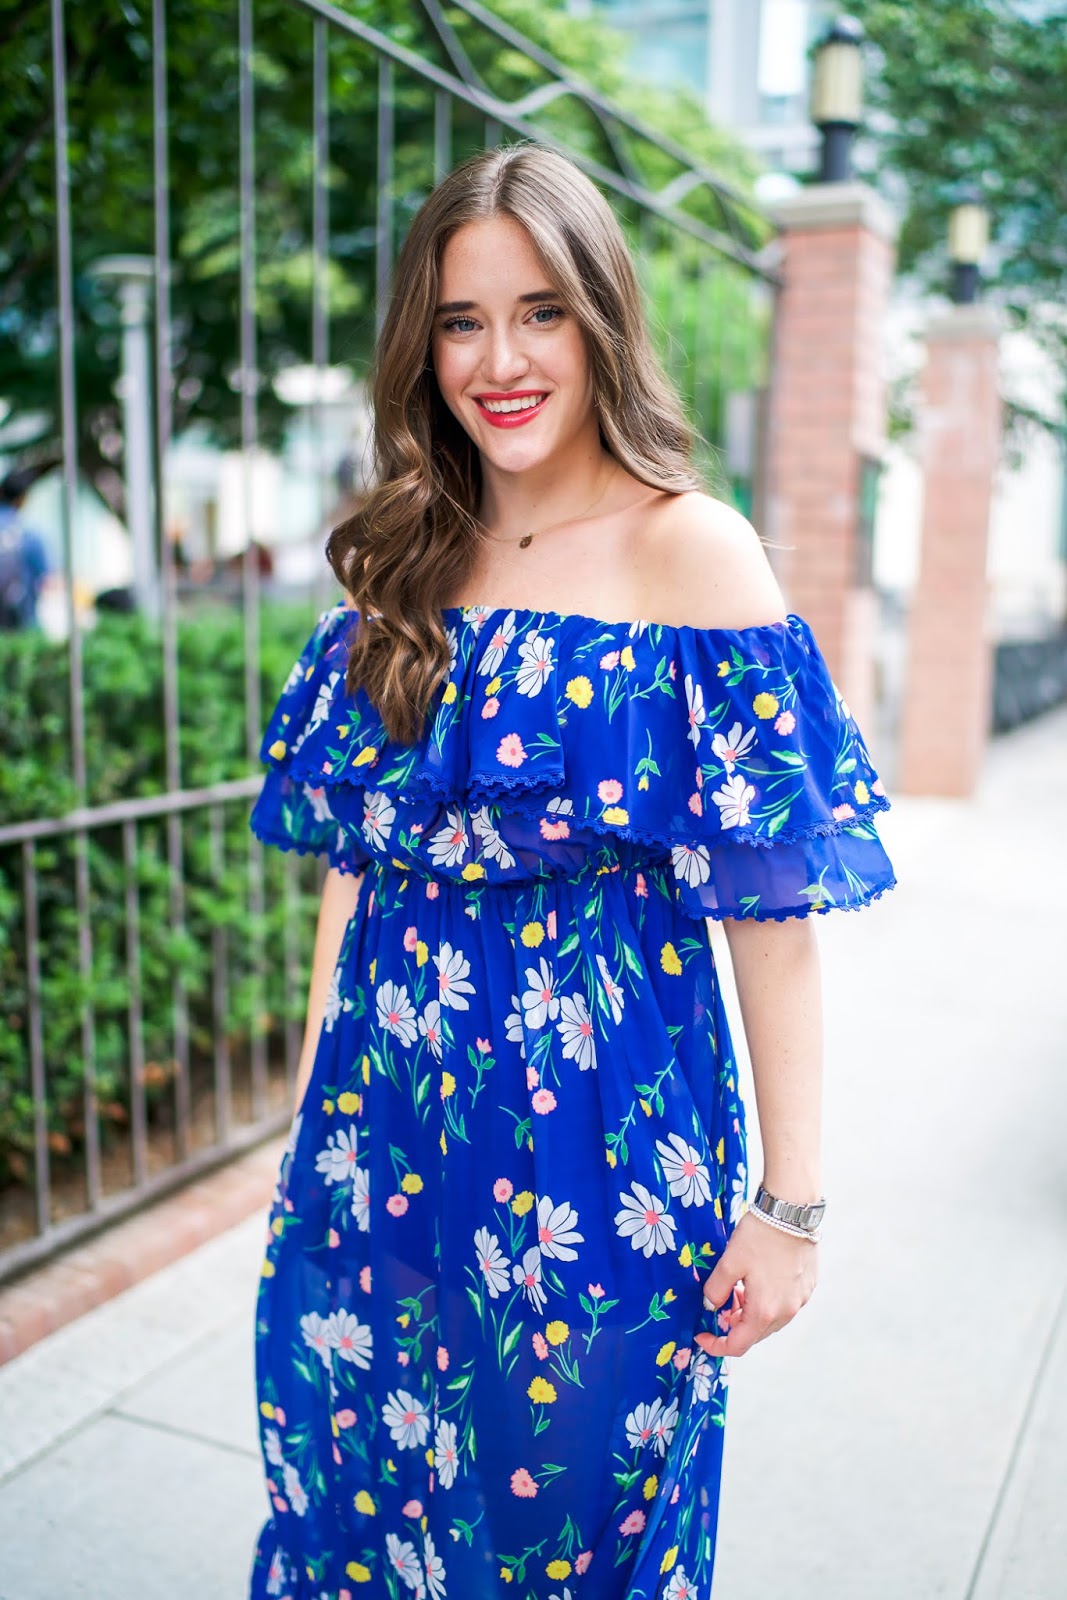 Topshop floral maxi dress styled by popular New York fashion blogger, Covering the Bases